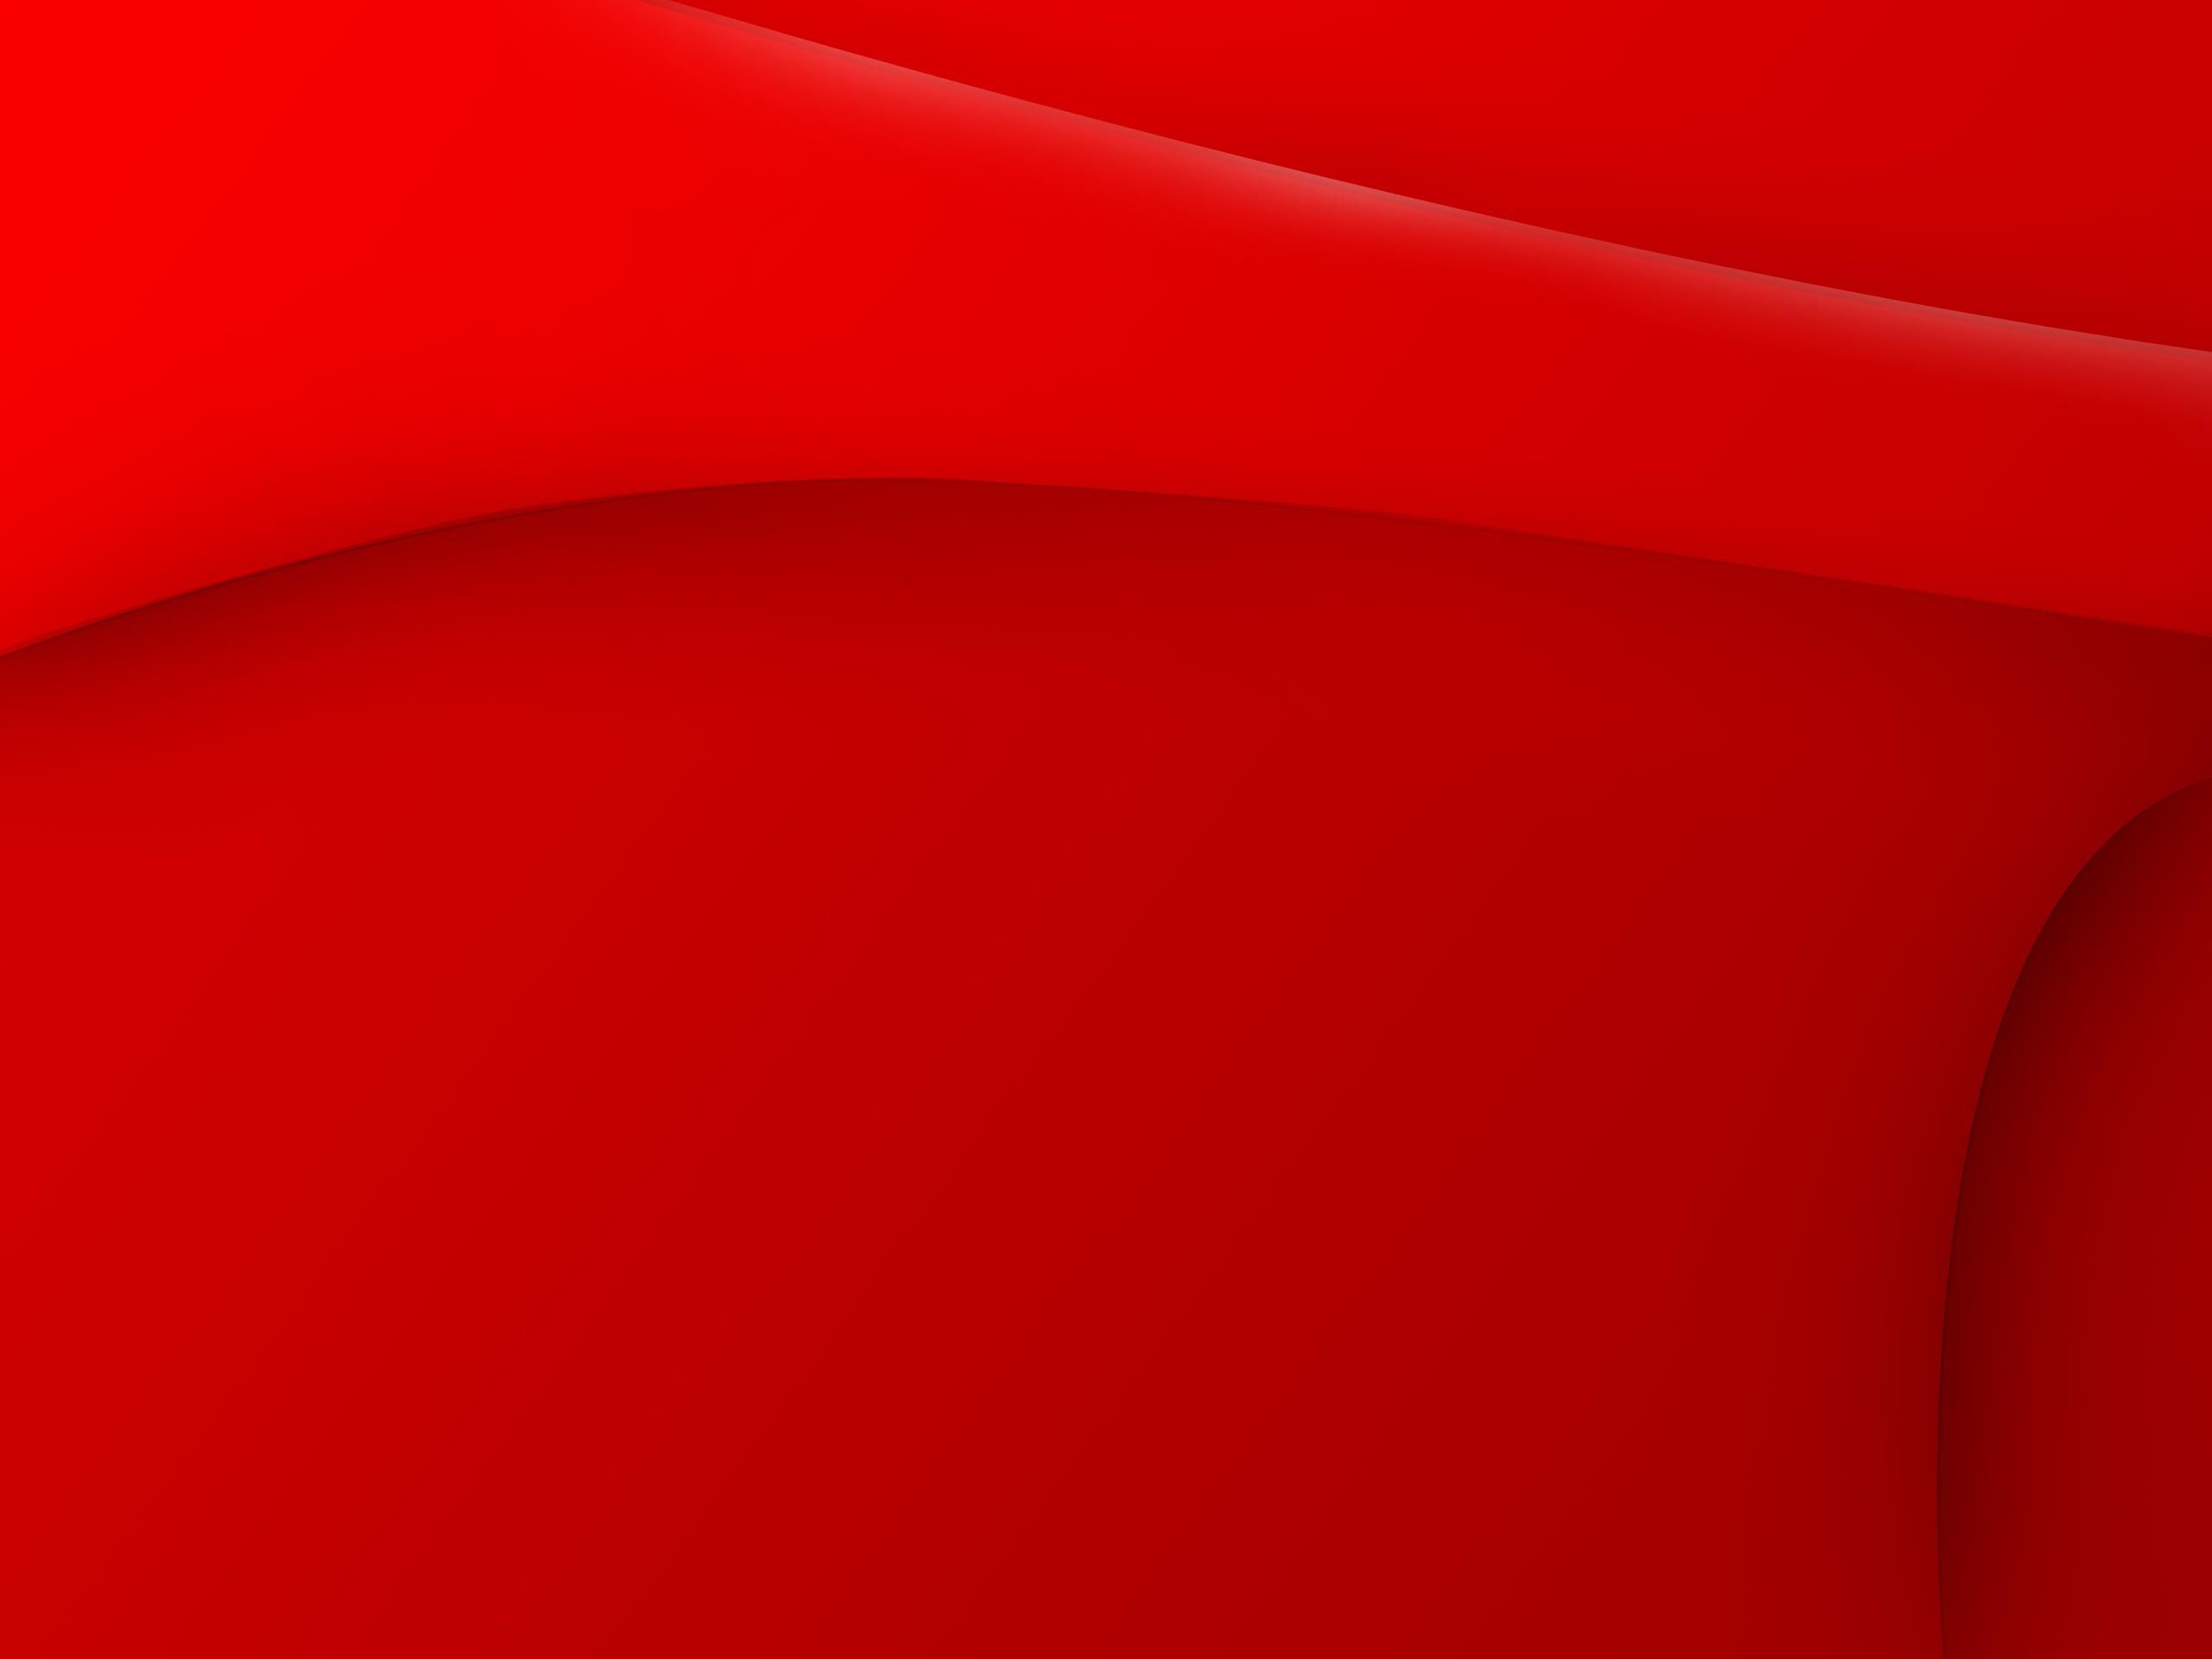 Solid red wallpaper